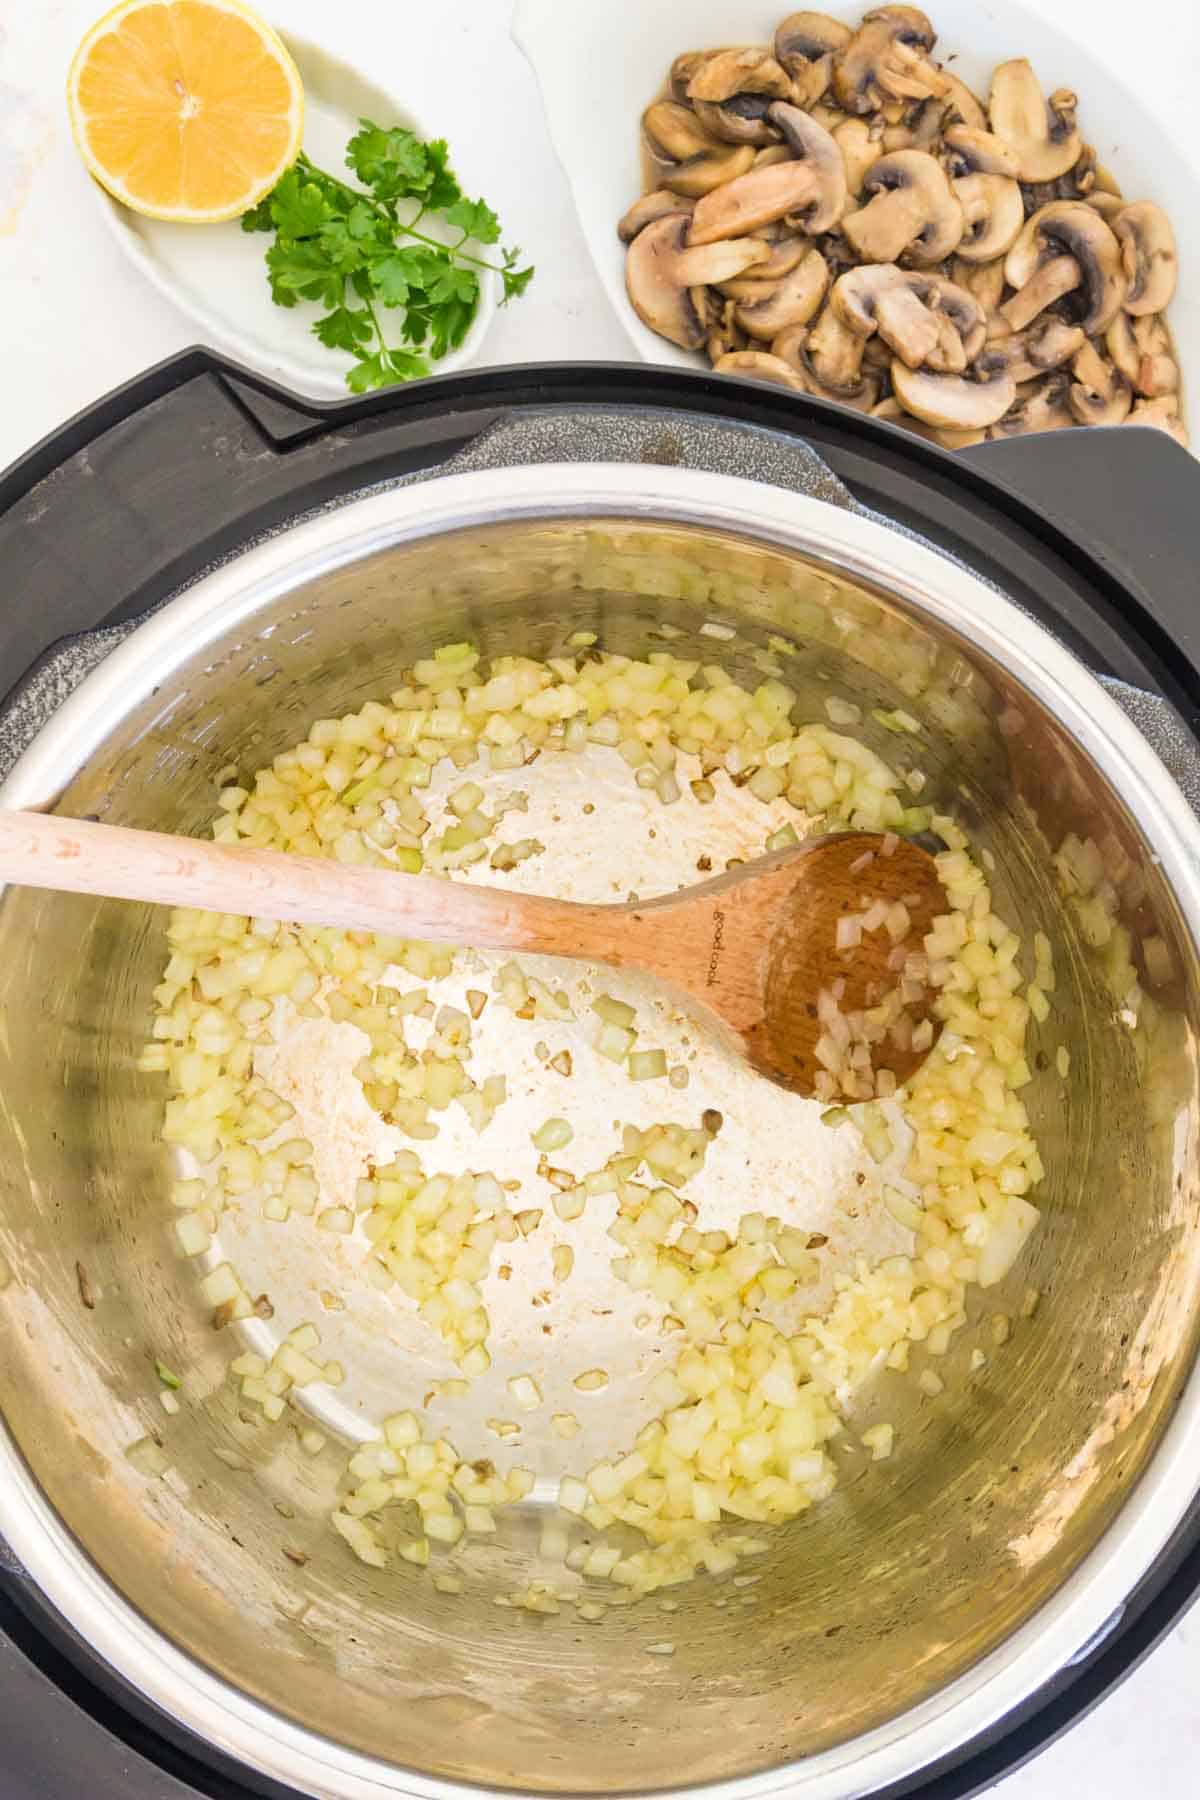 Onion and garlic sauteing inside the Instant Pot.